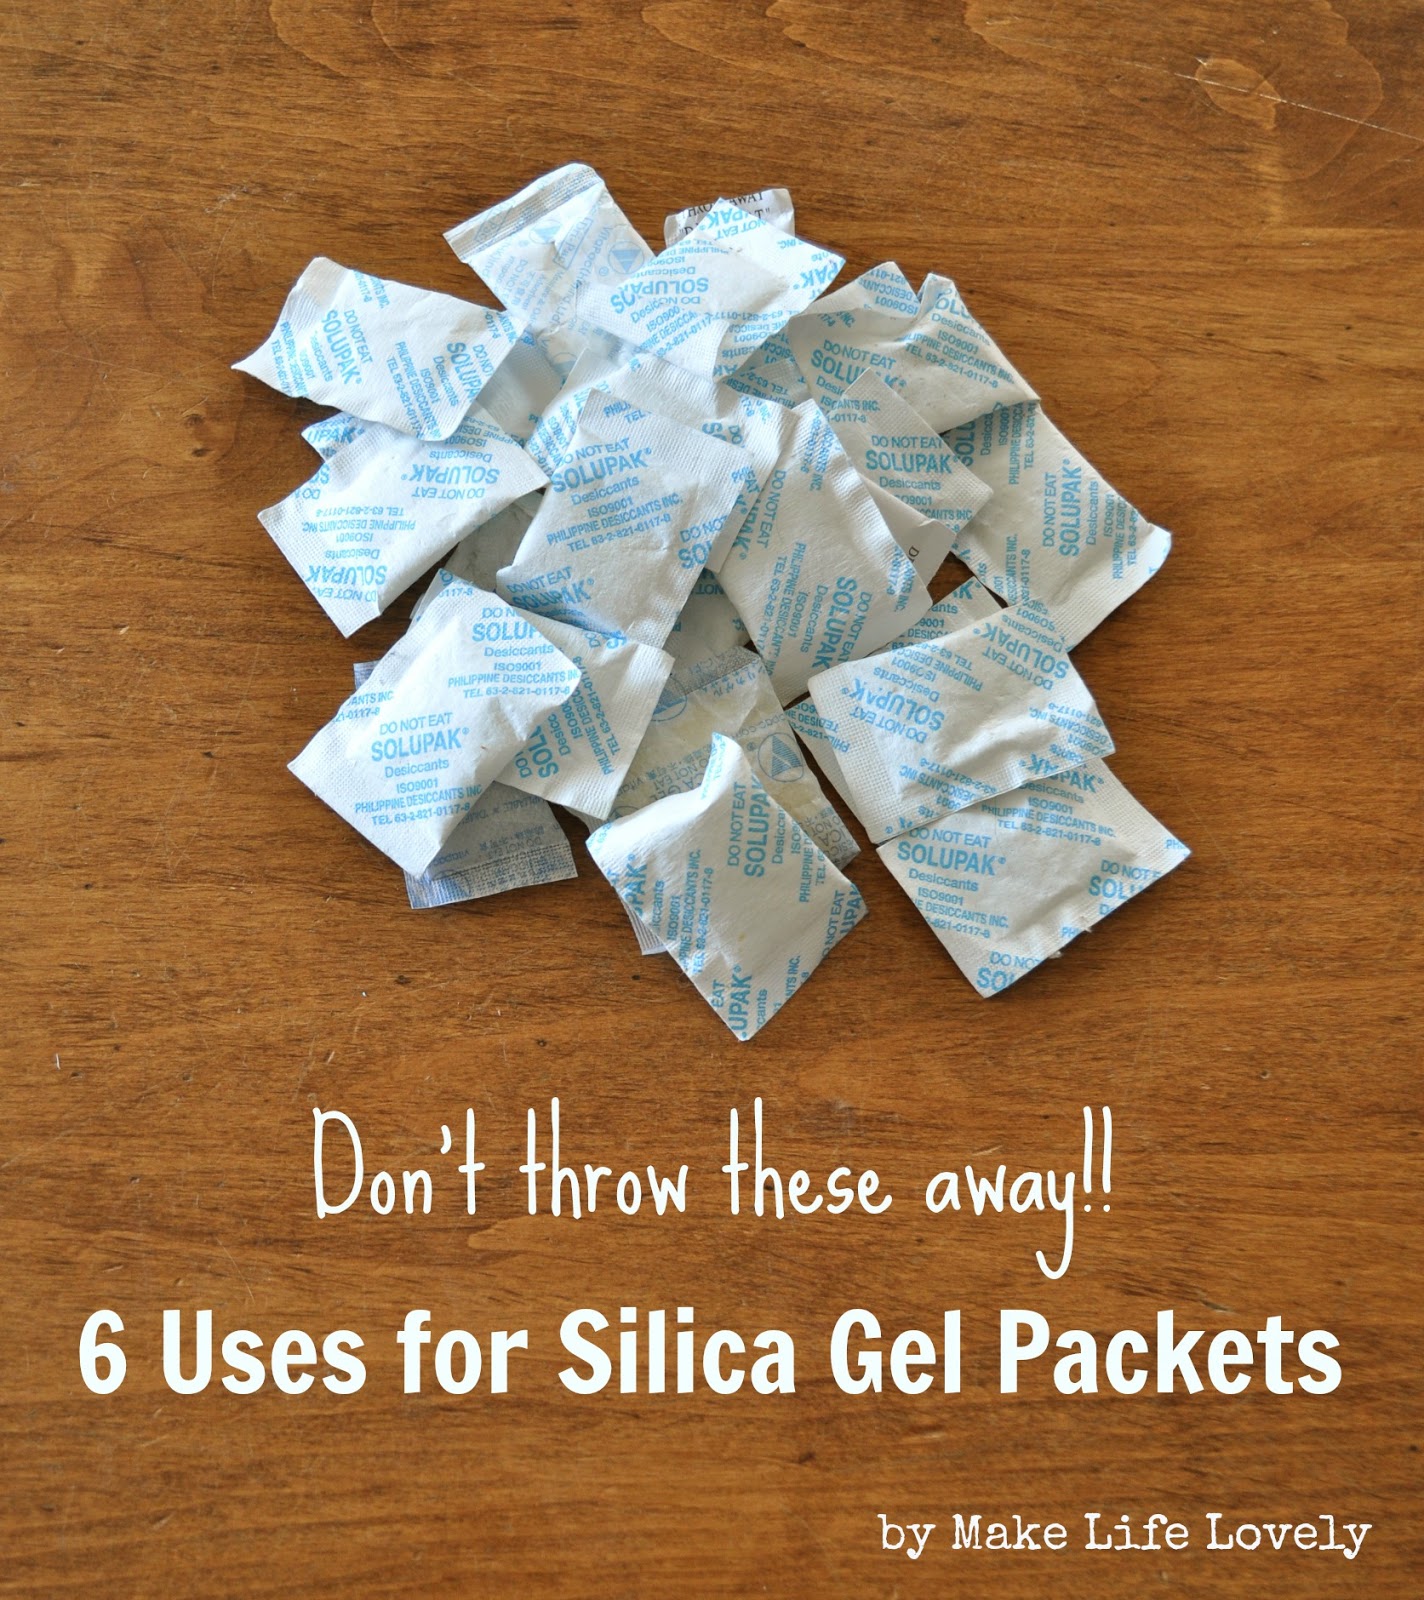 Silica Gel Packets, Make Life Lovely